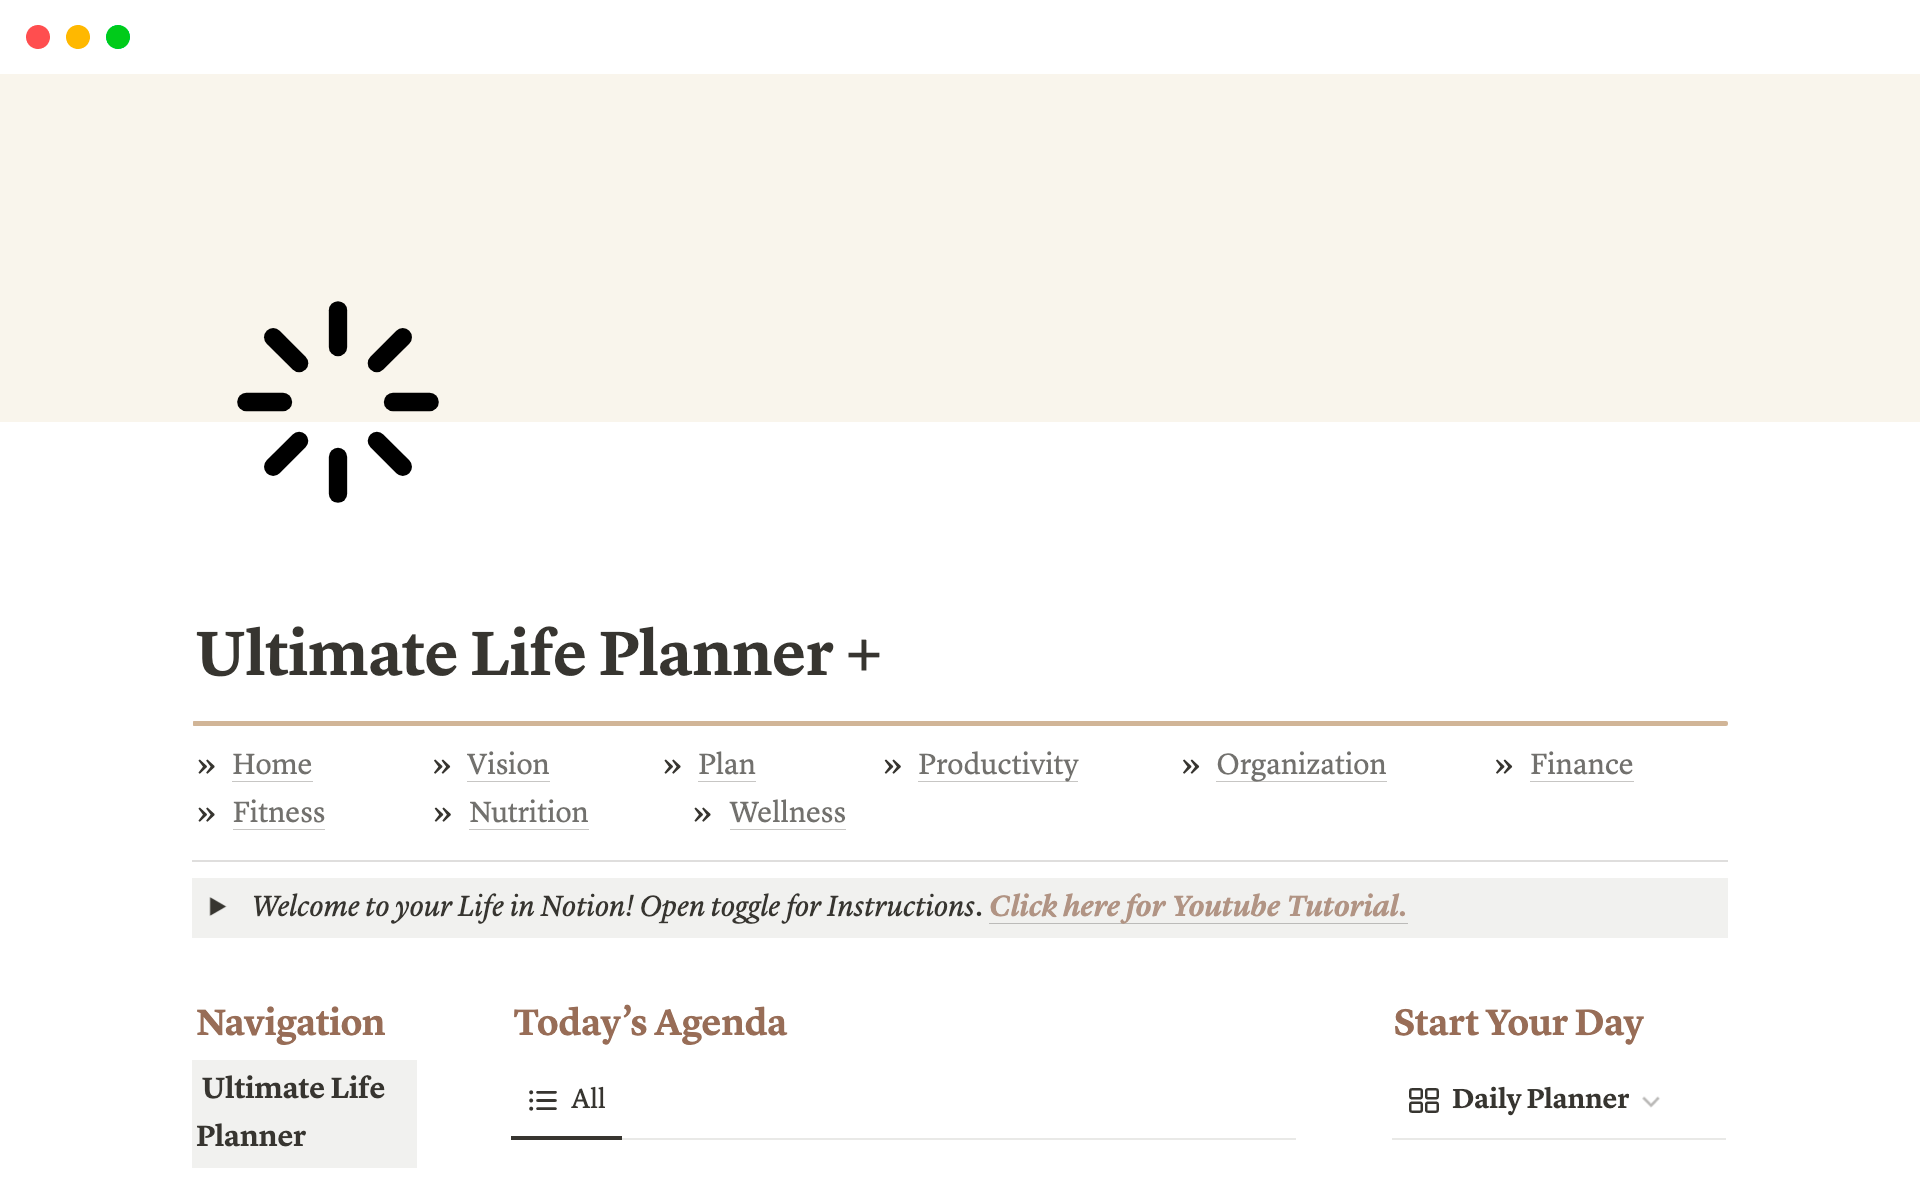 The Ultimate Life Planner - Everything you need for your Life Planner